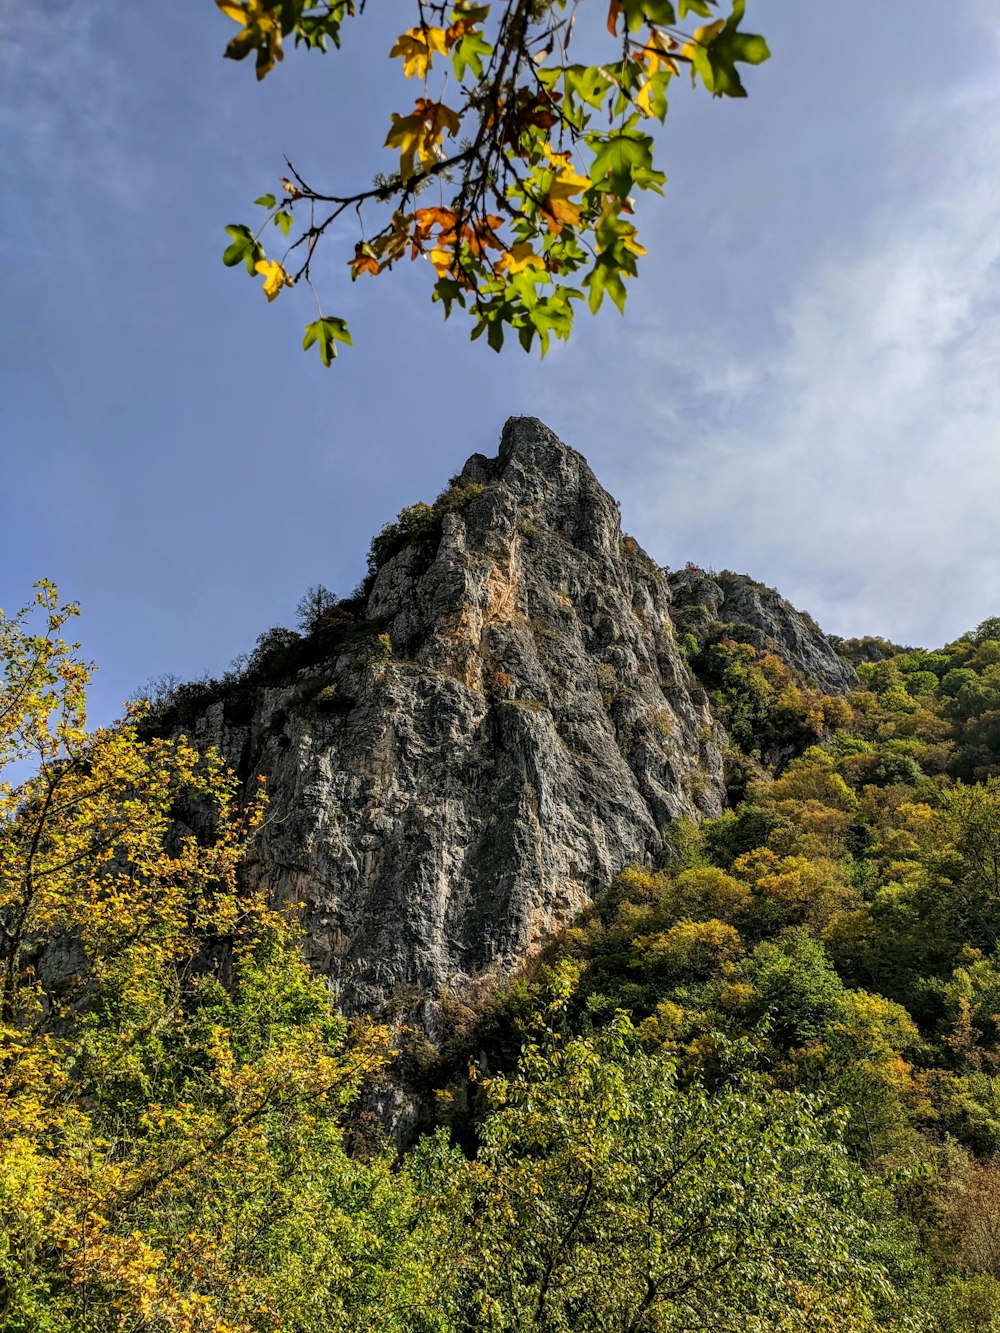 green and yellow trees near gray rock mountain under blue sky during daytime